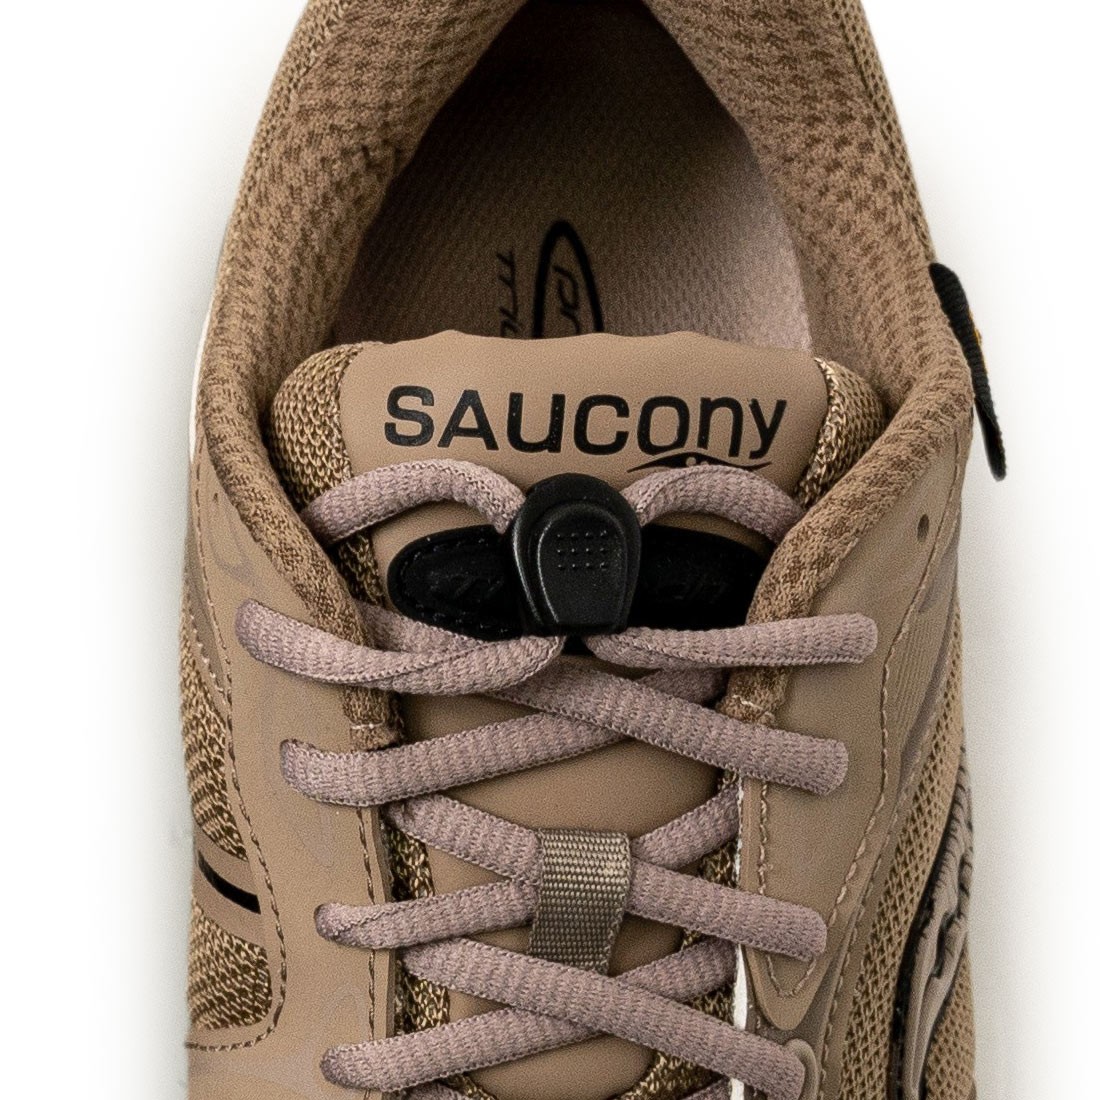 Saucony and rugged heritage brand White Mountaineering team up to render a premium collection of